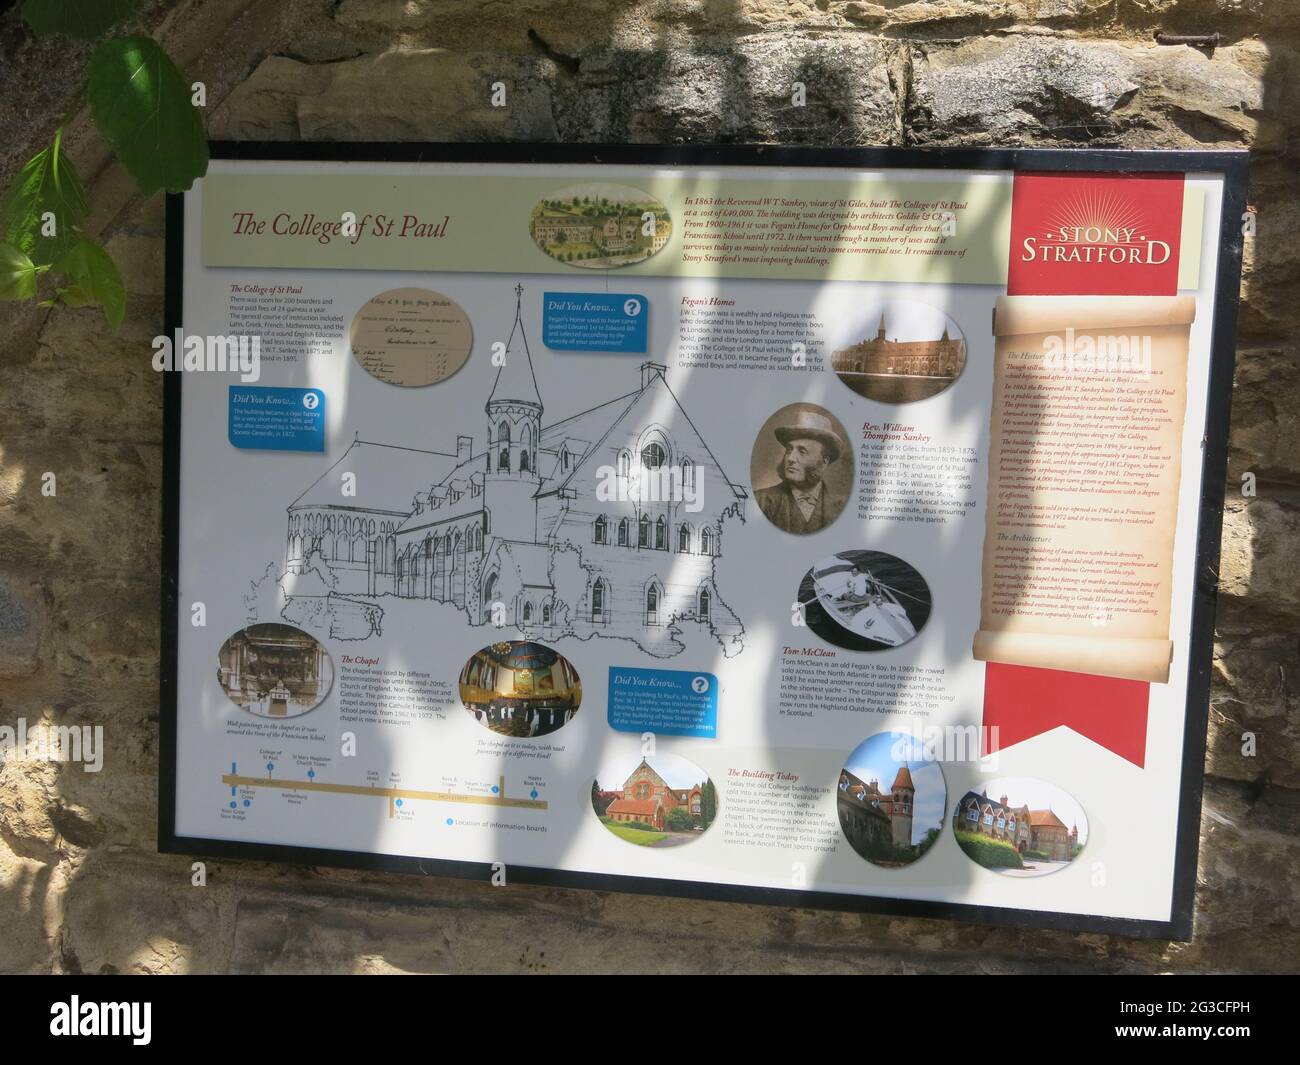 View of the information board outside the College of St Paul in Stony Stratford, giving the history of this landmark building. Stock Photo